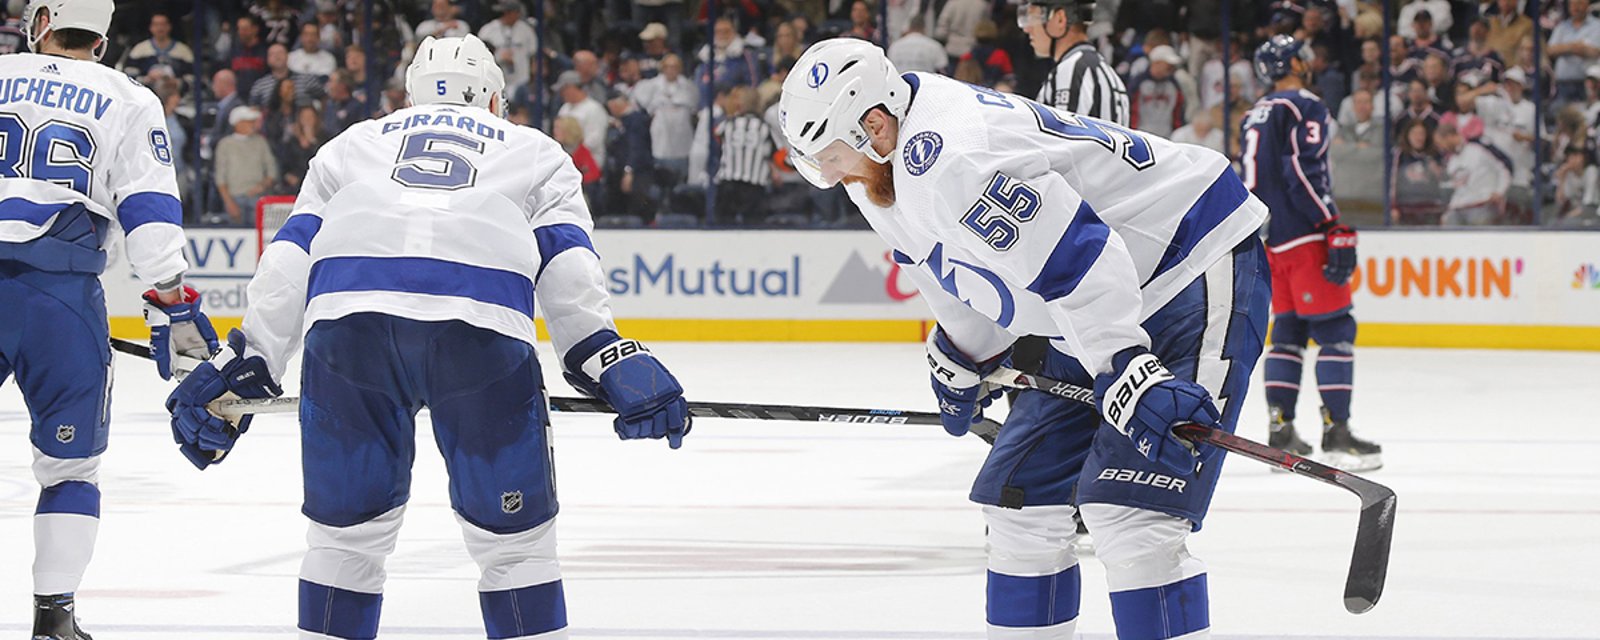 Report: Lightning management gave players four days off and a private jet for golfing trip BEFORE playoffs